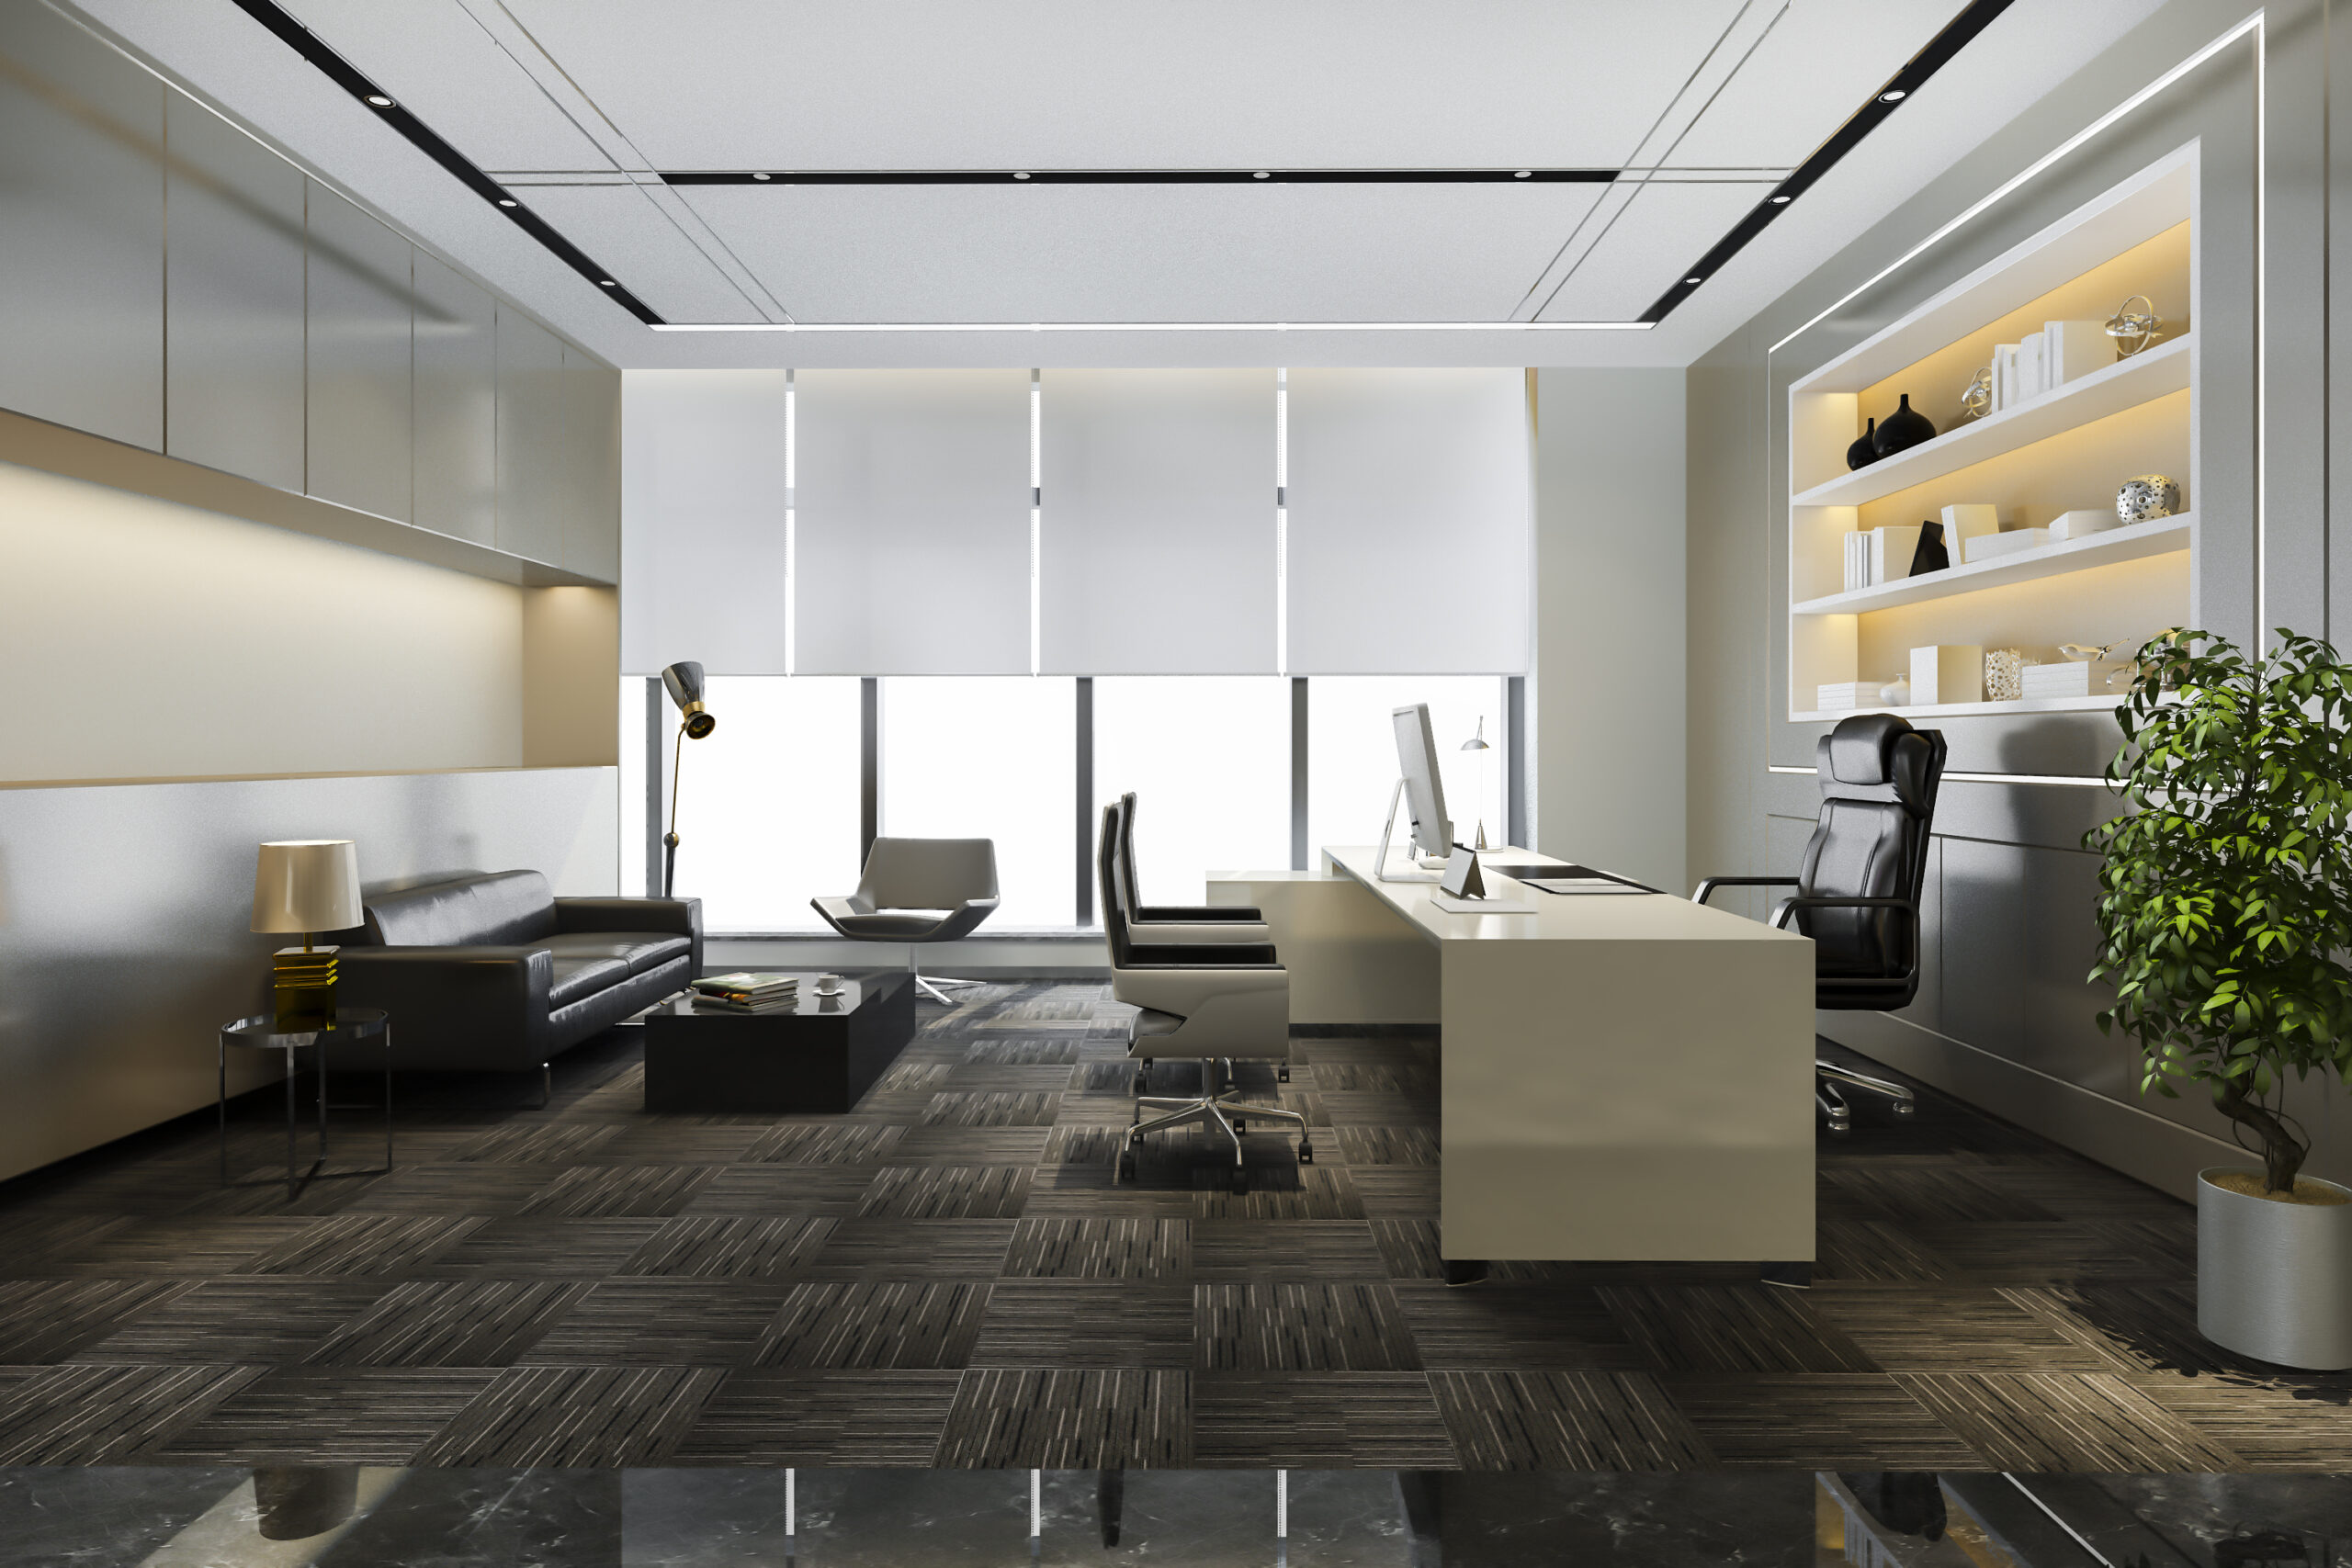 Architouch | How To Make Your Office Furniture Work For You